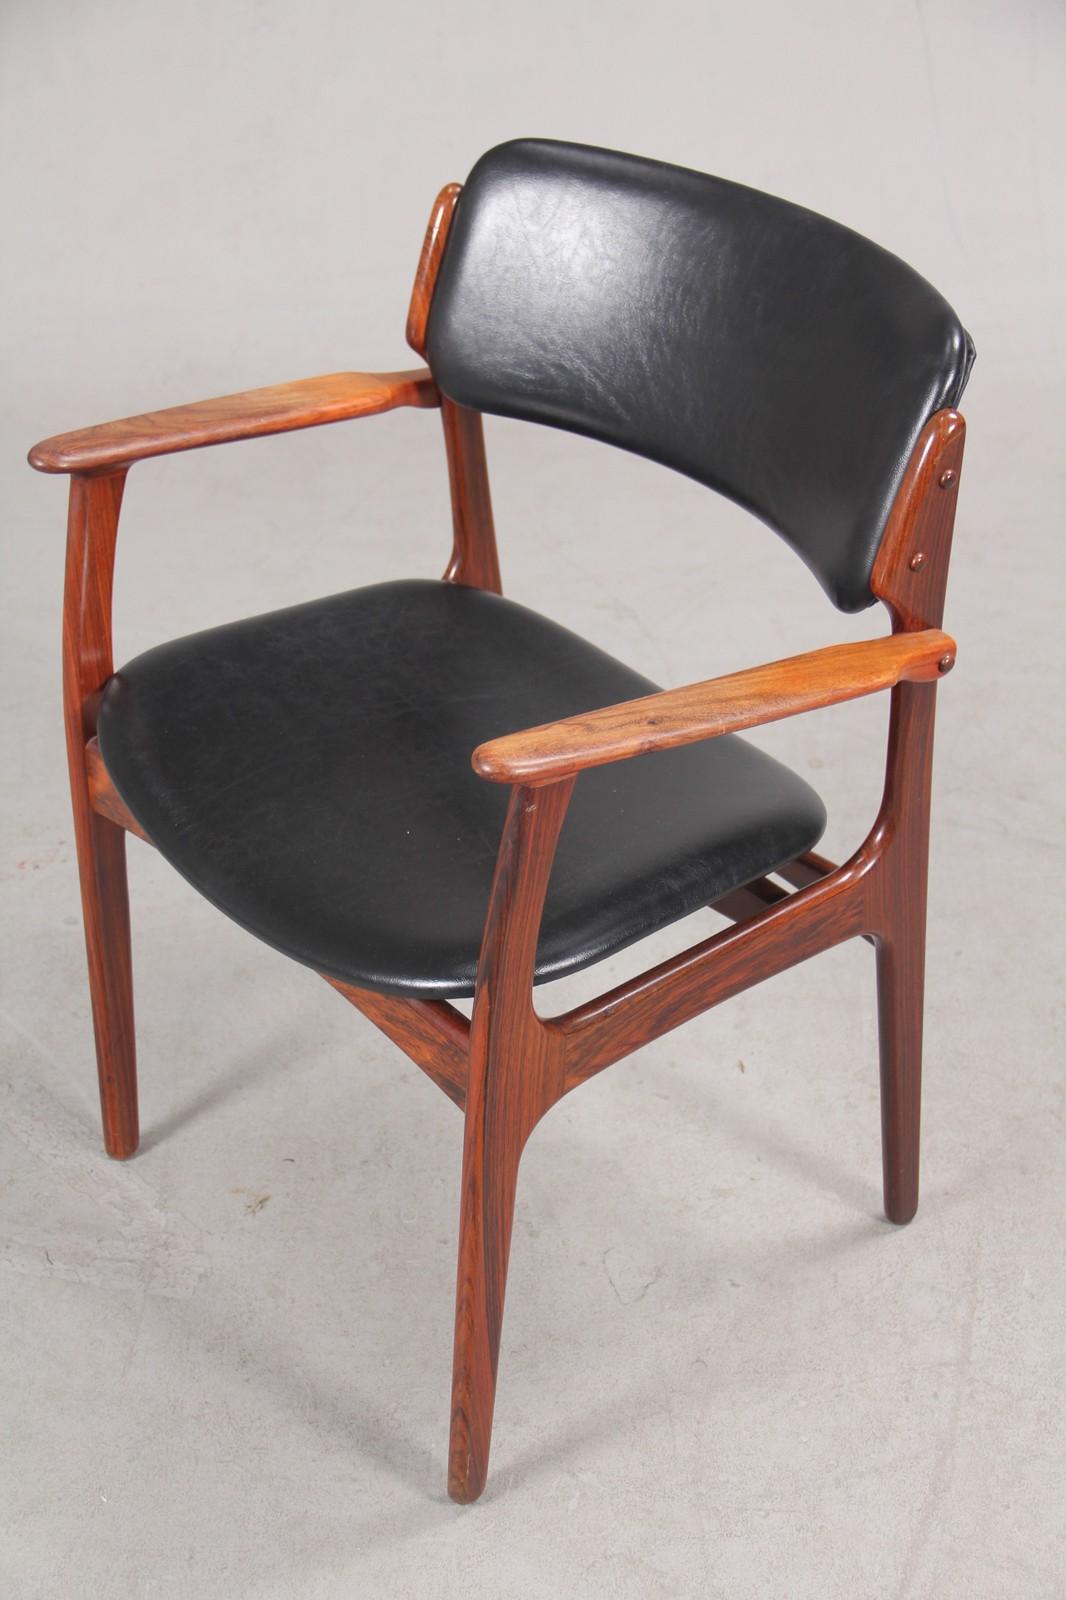 Set of eight elegant yet solid Erik Buch armchairs model in rosewood with excellent woodwork that are evidence of good design and craftsmanship.

A solid rosewood construction with Erik Buch's characteristic floating seat and backrest that ensures